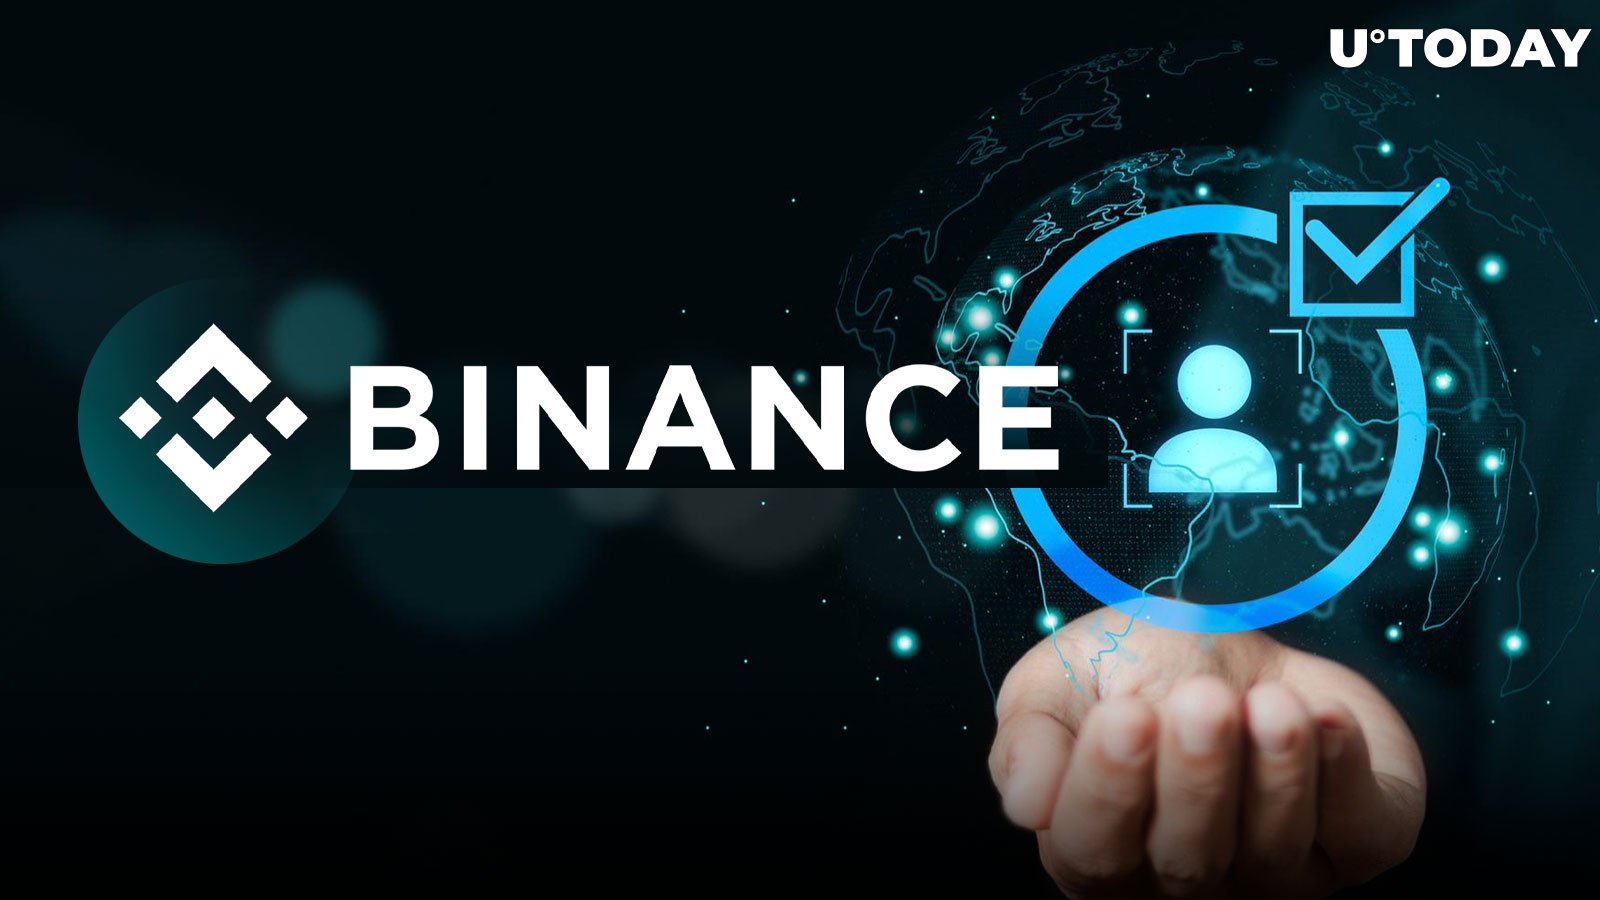 Binance to Fully Restrict Sub-Accounts Without KYC